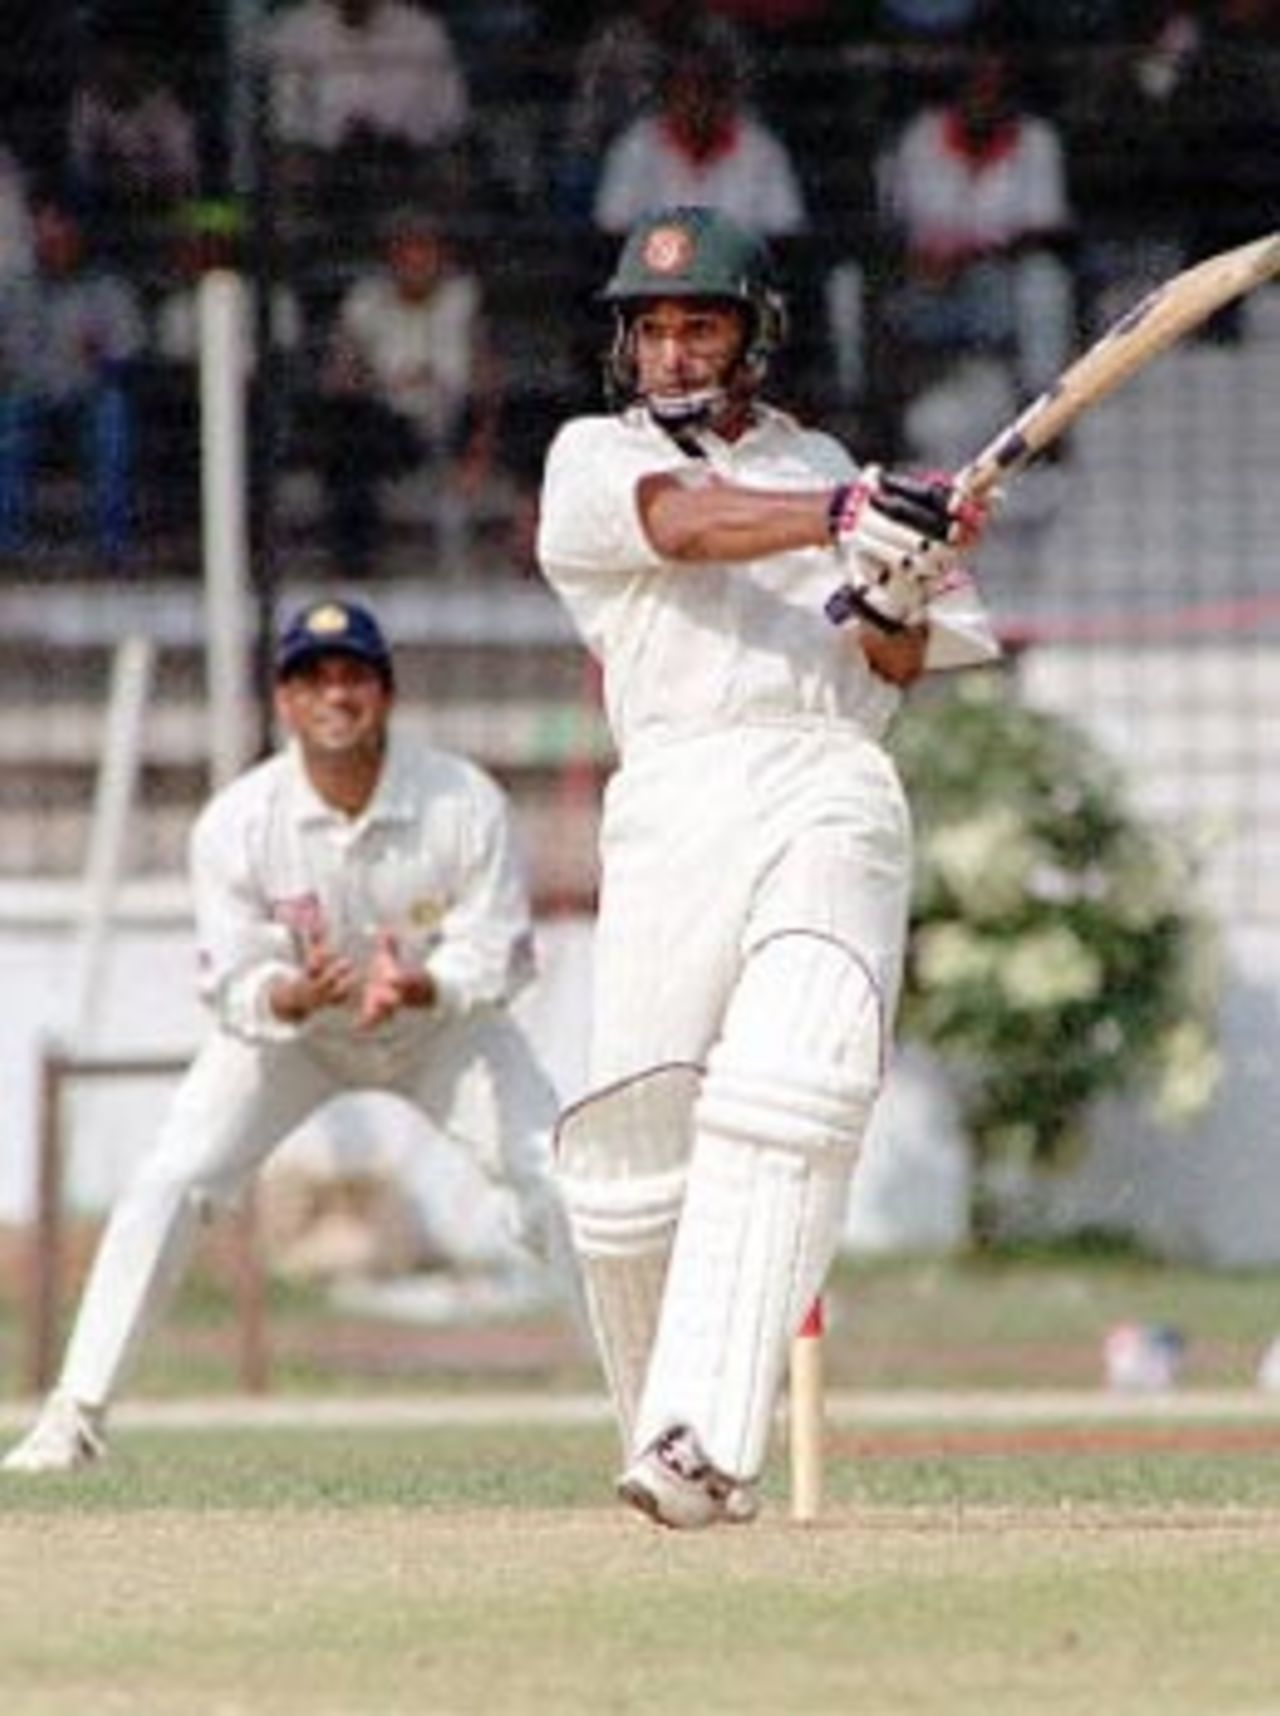 Bangladeshi batsman Habibul Bashar (R), watched by Sachin Tendulker (L), hits a ball off Indian pacer Zahir Khan, 10 November 2000, at Bangabandhu National Stadium during this South Asian country's inaugural Test match against India. Bashar hit 71 before being caught by the Indian skipper Sourav Ganguly off Zaheer Khan. Bangladesh won the toss and elected to bat.